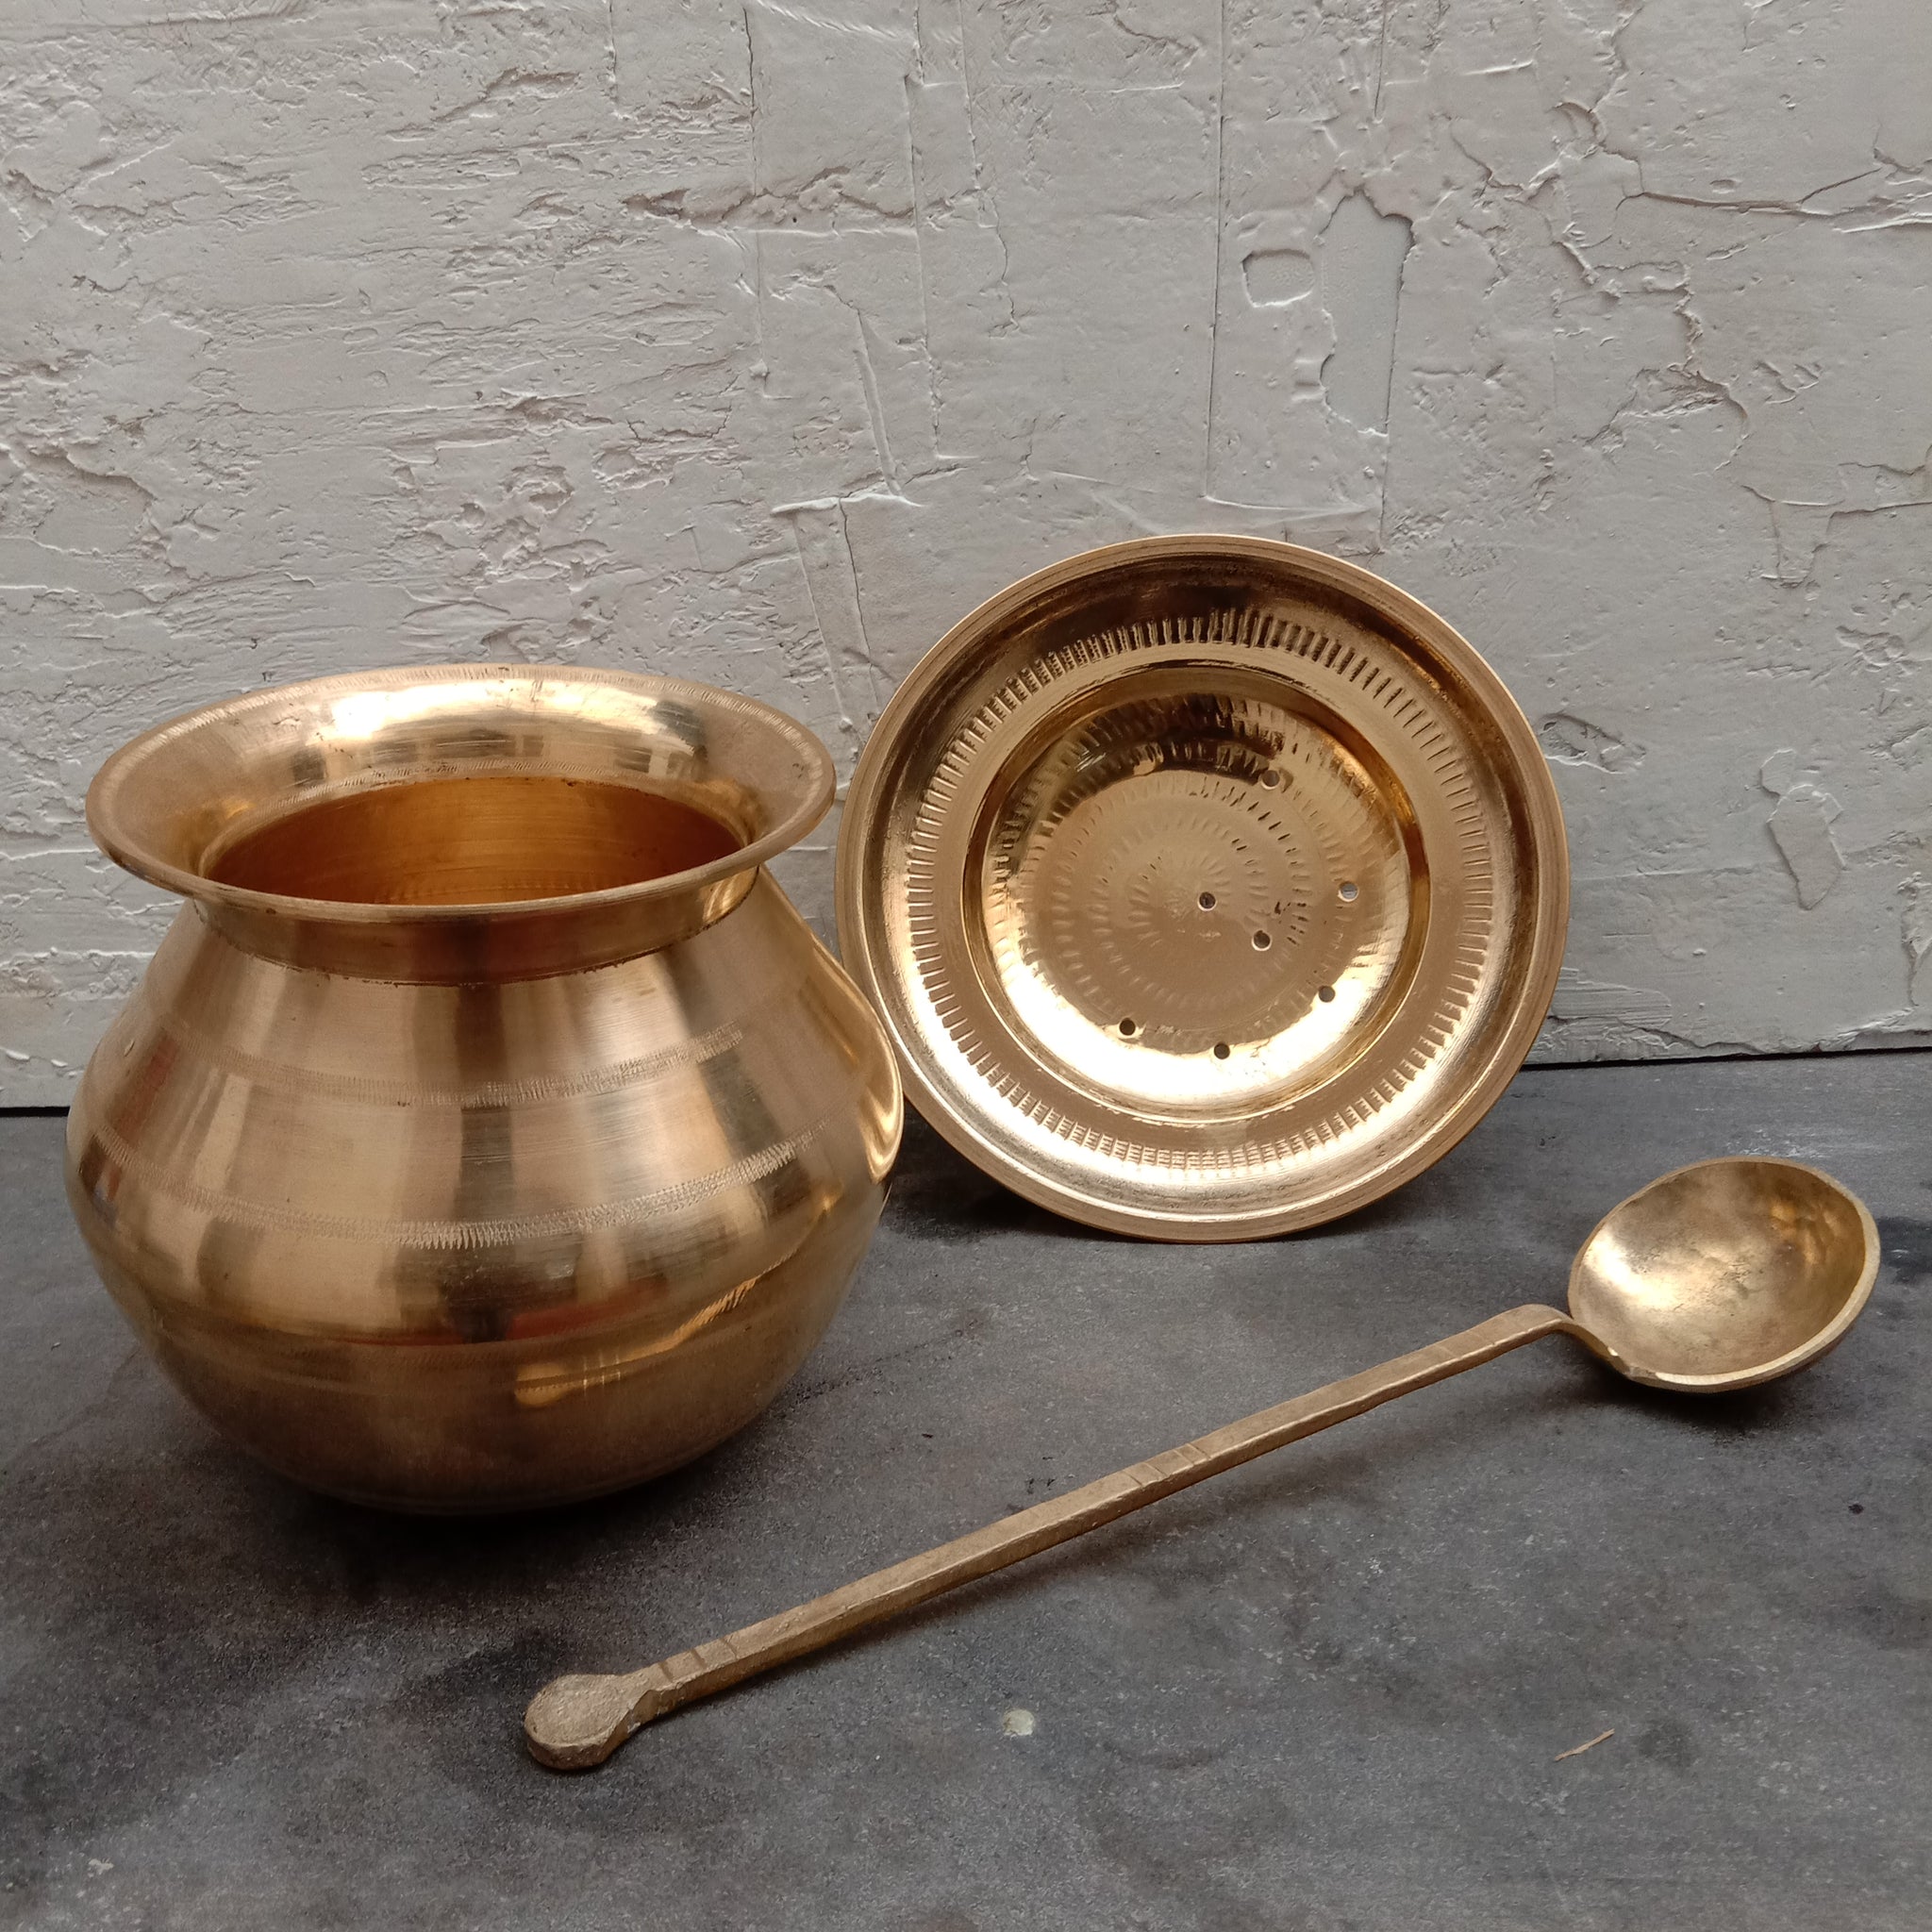 Brass or Bronze which is better for cooking? The Pros & Cons of